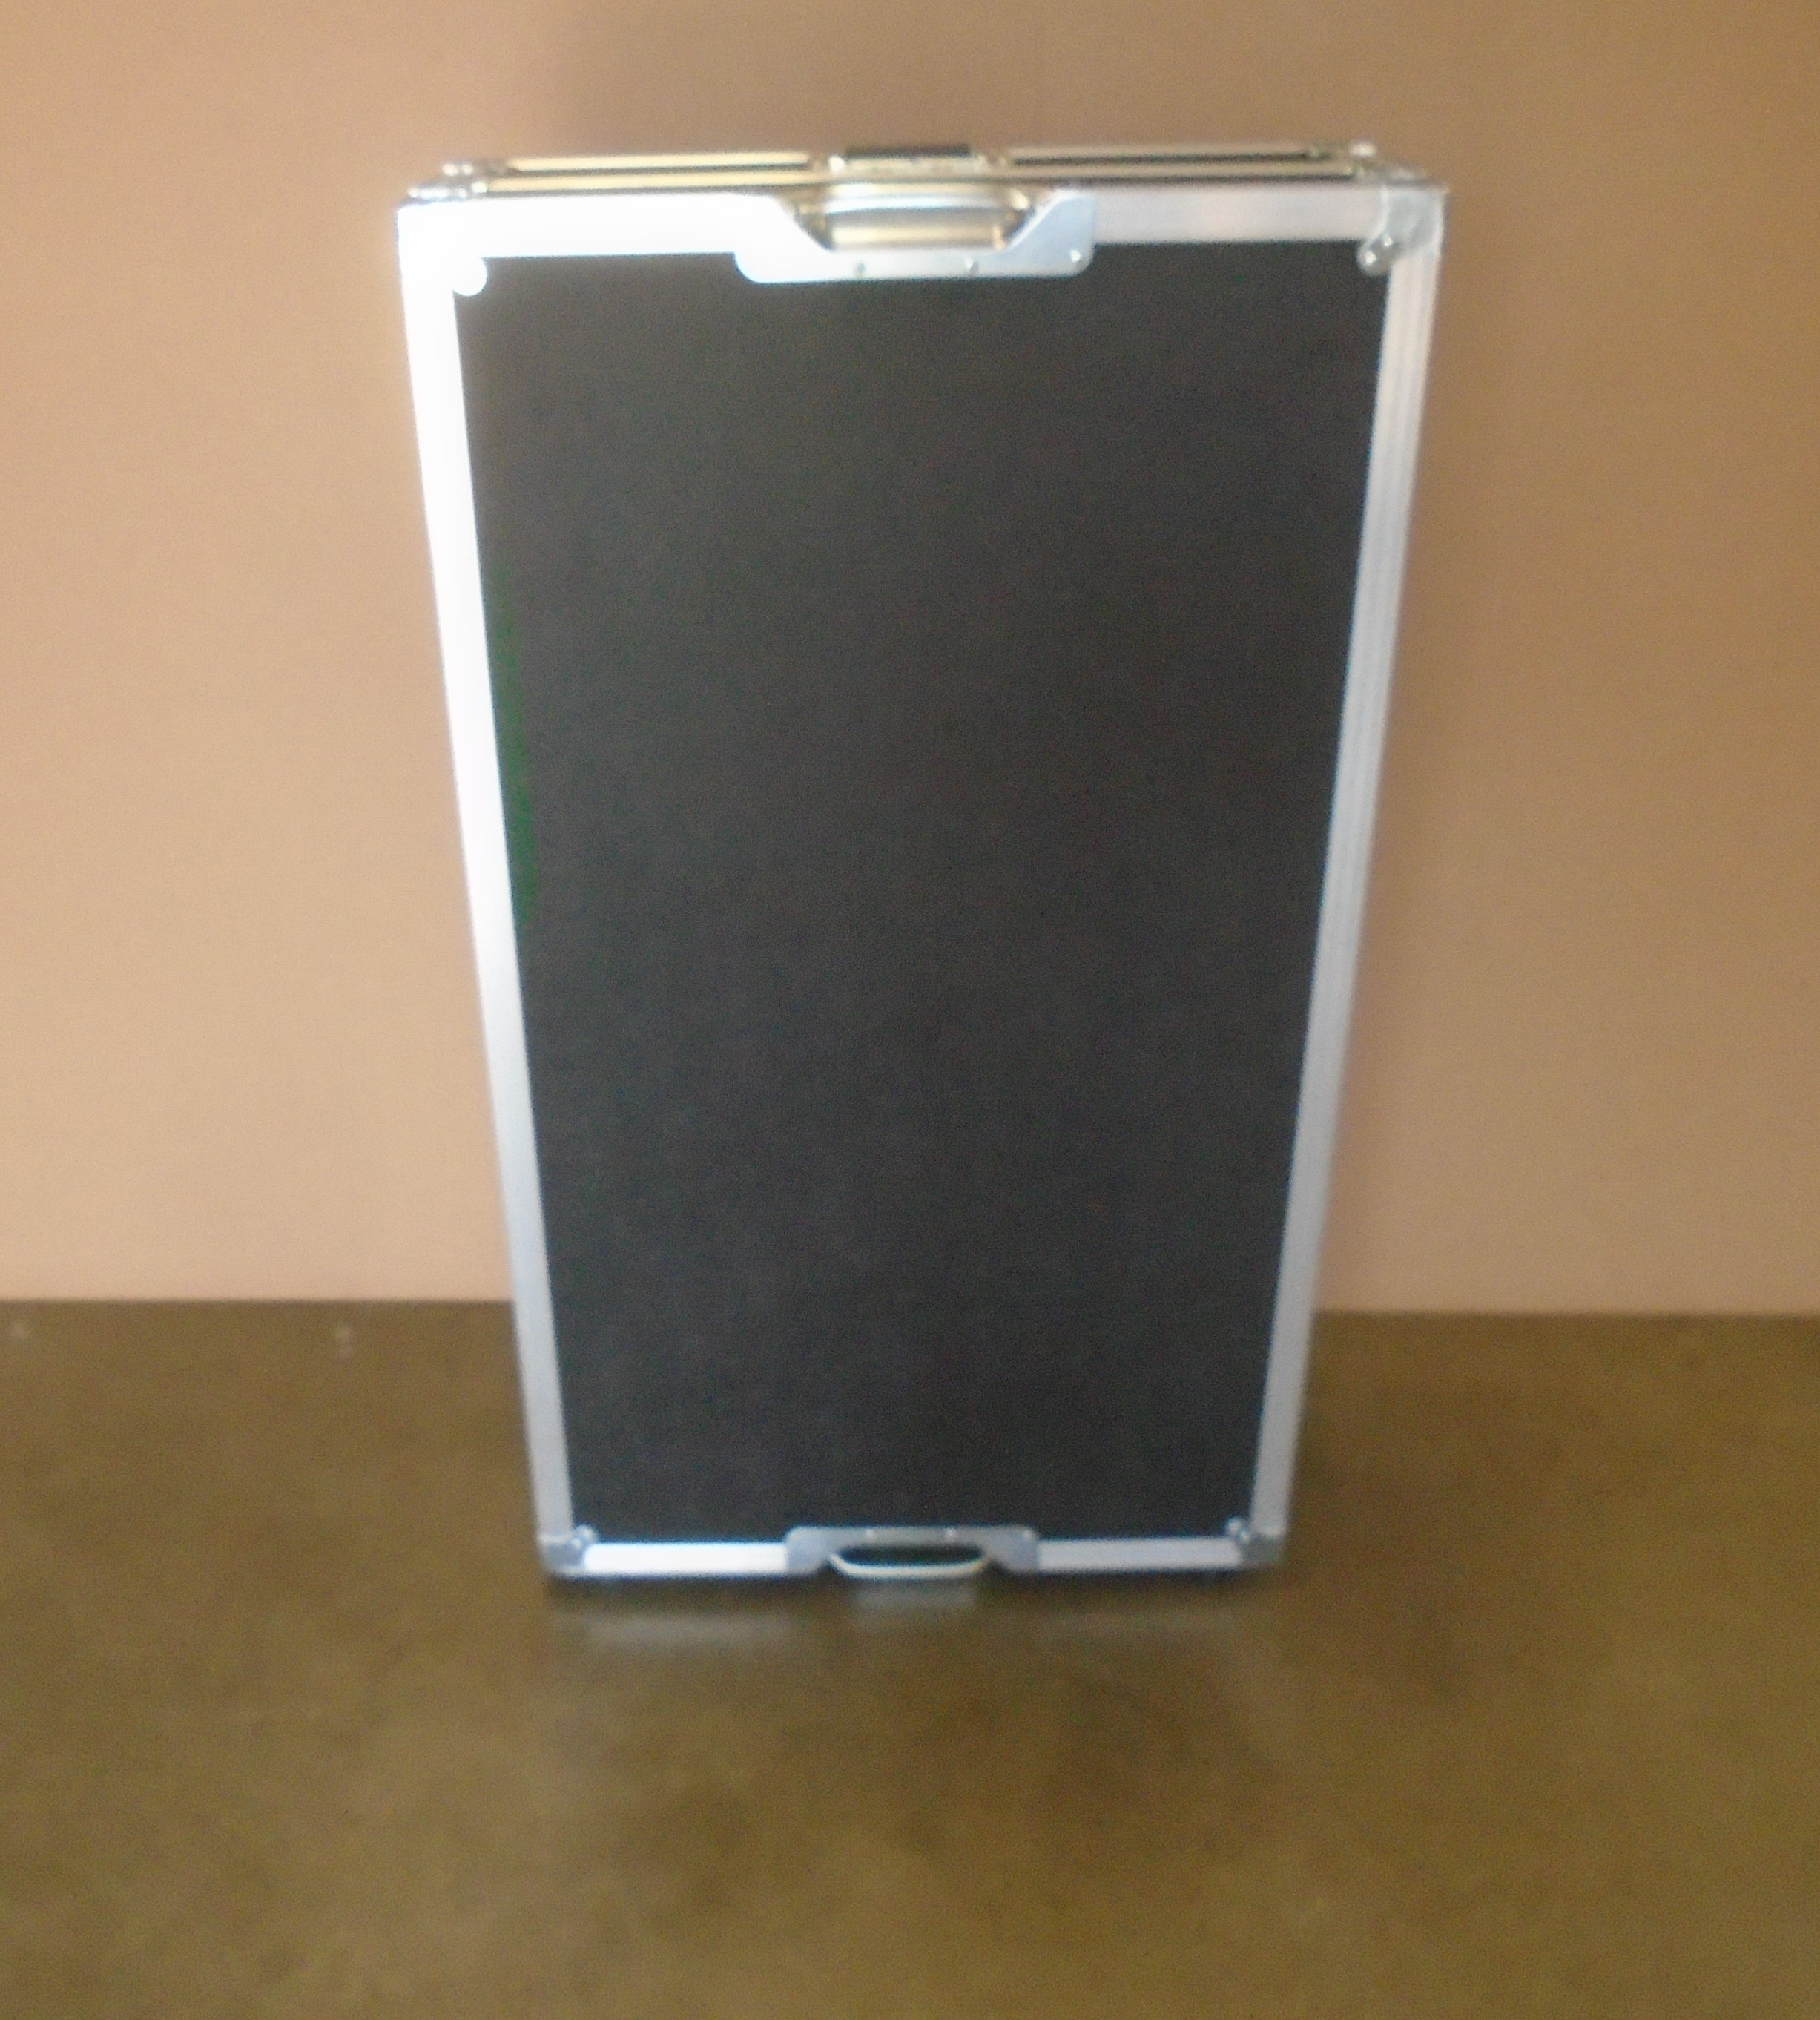 Print # 8394 - Custom Road Case for DJB-1000 Command Center, Top Unit By Nelson Case Corp